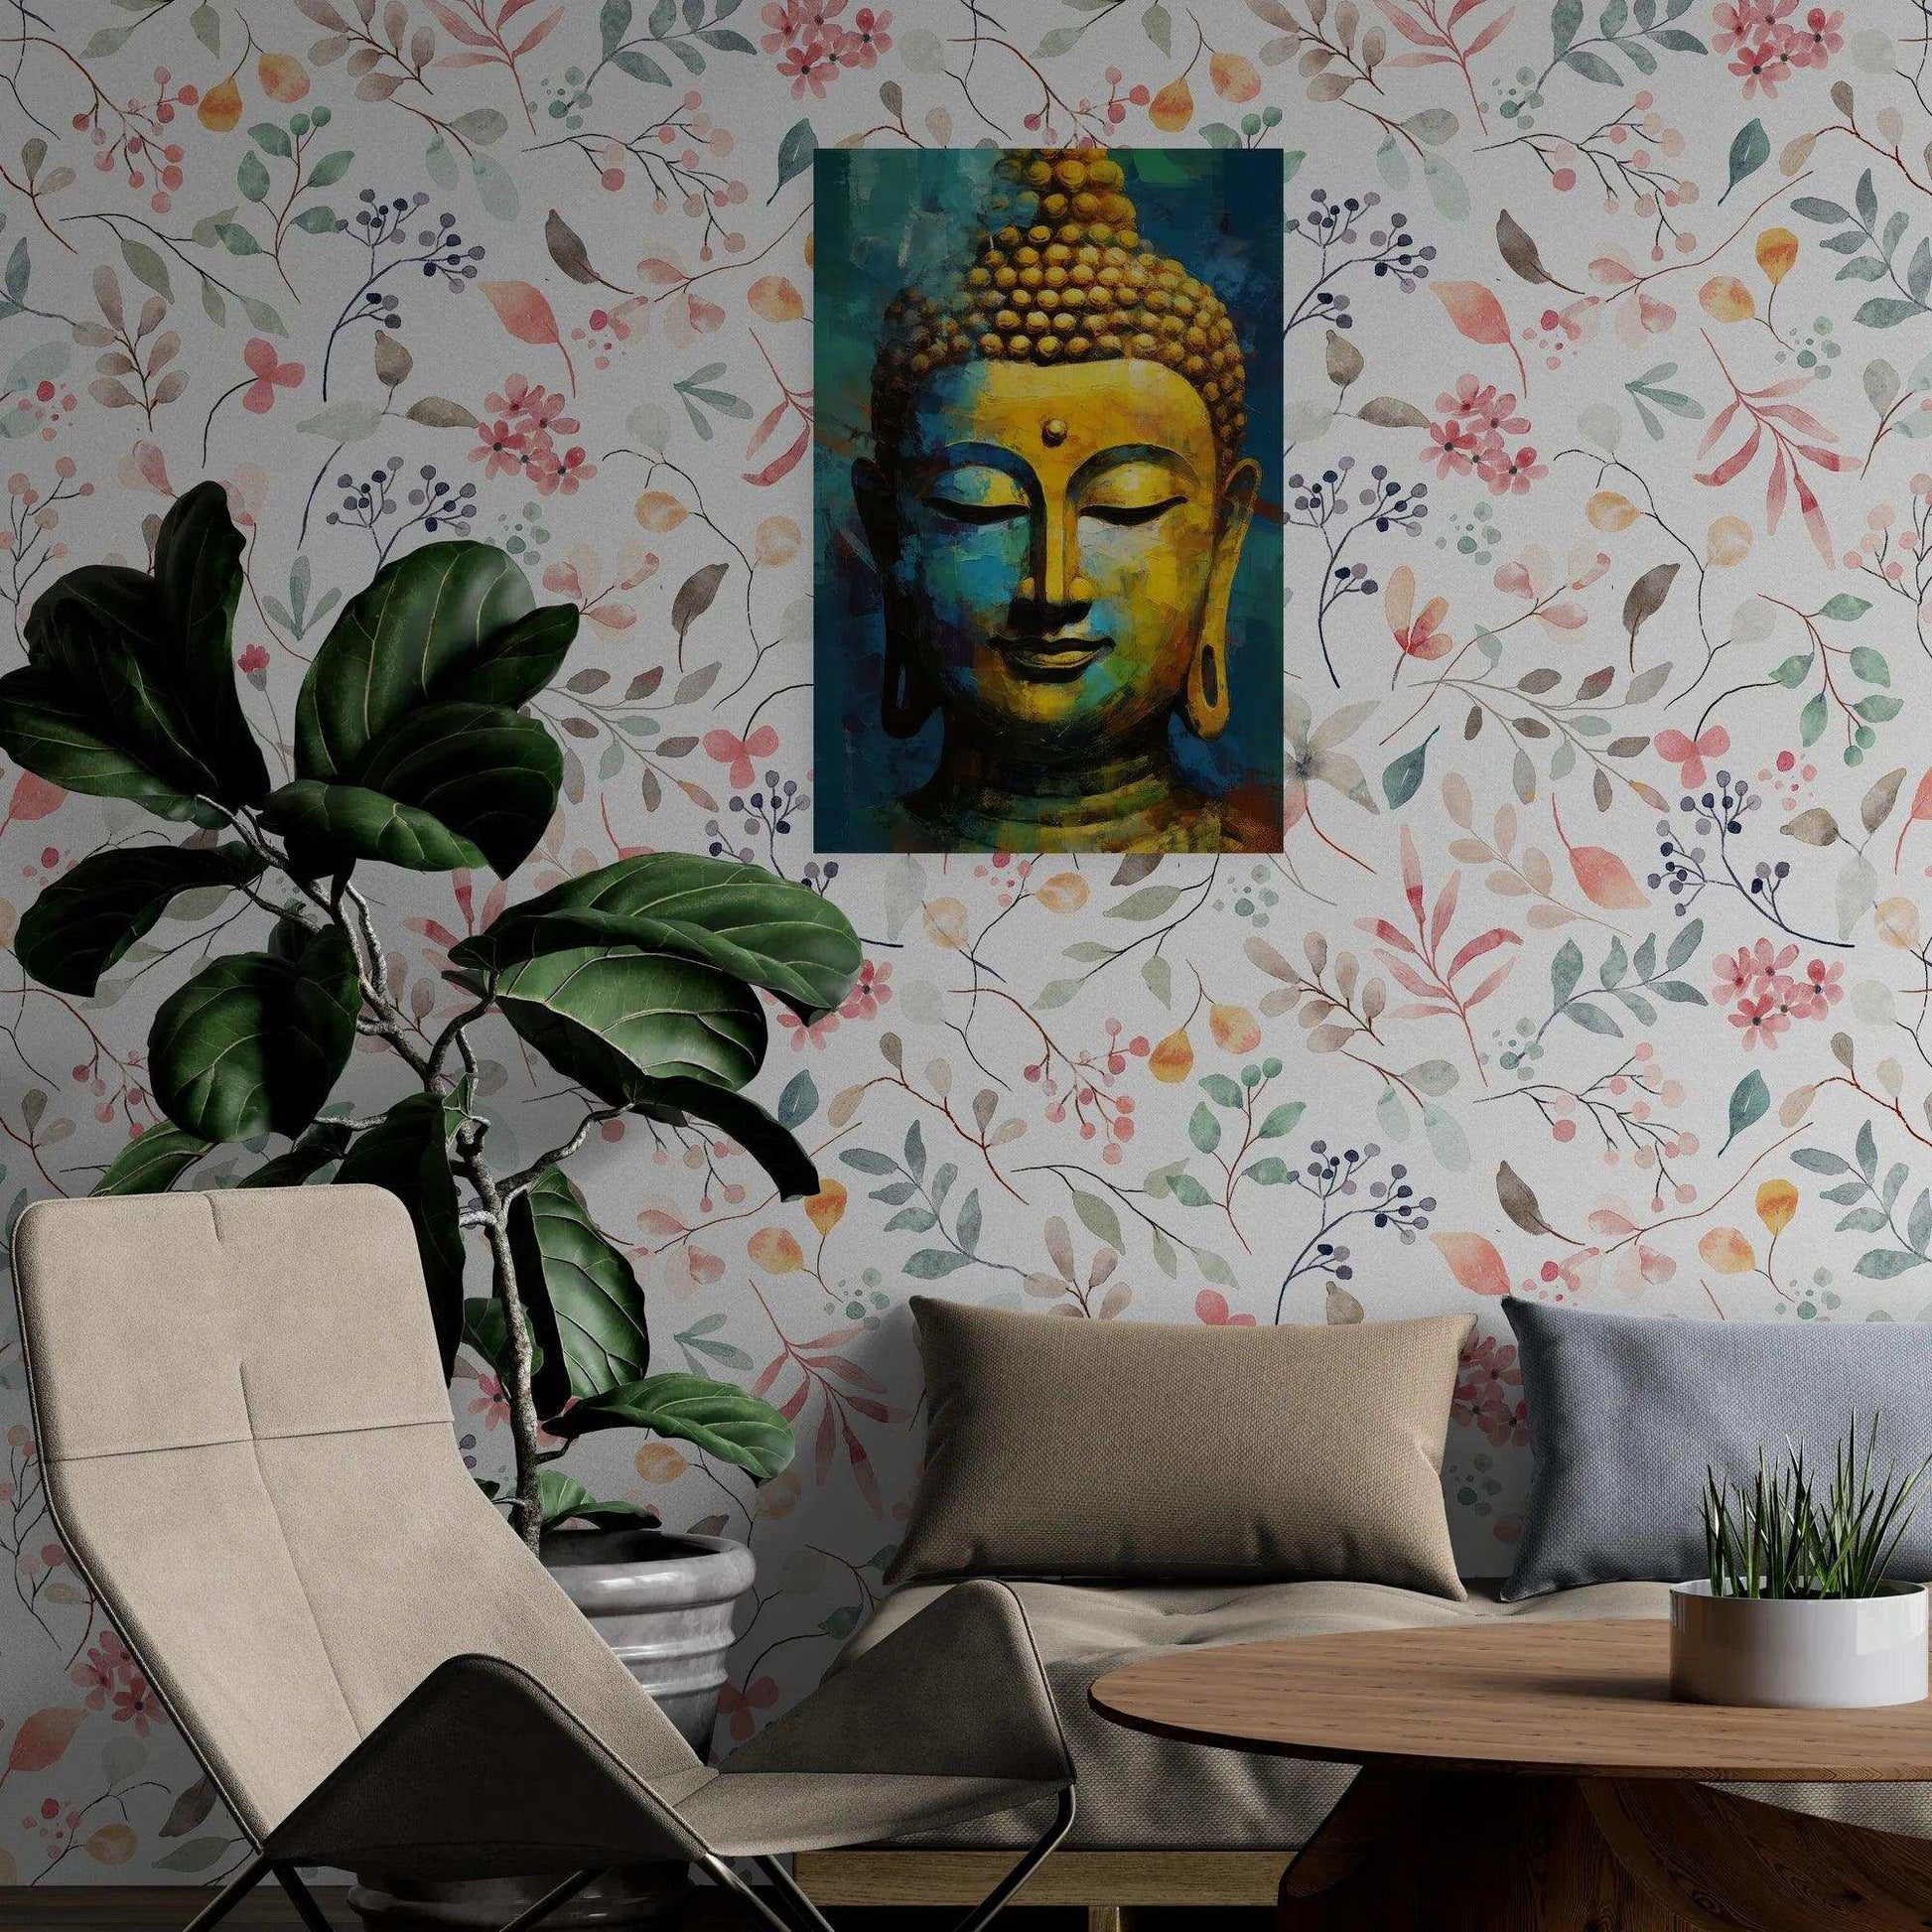 A cozy reading nook is brightened by the vibrant colors of a Buddha portrait on the wall, featuring rich gold and blue tones. A lush green plant, a comfortable beige armchair with cushions, and a simple wooden table with a pot of grass create a peaceful and welcoming space for relaxation and reflection.